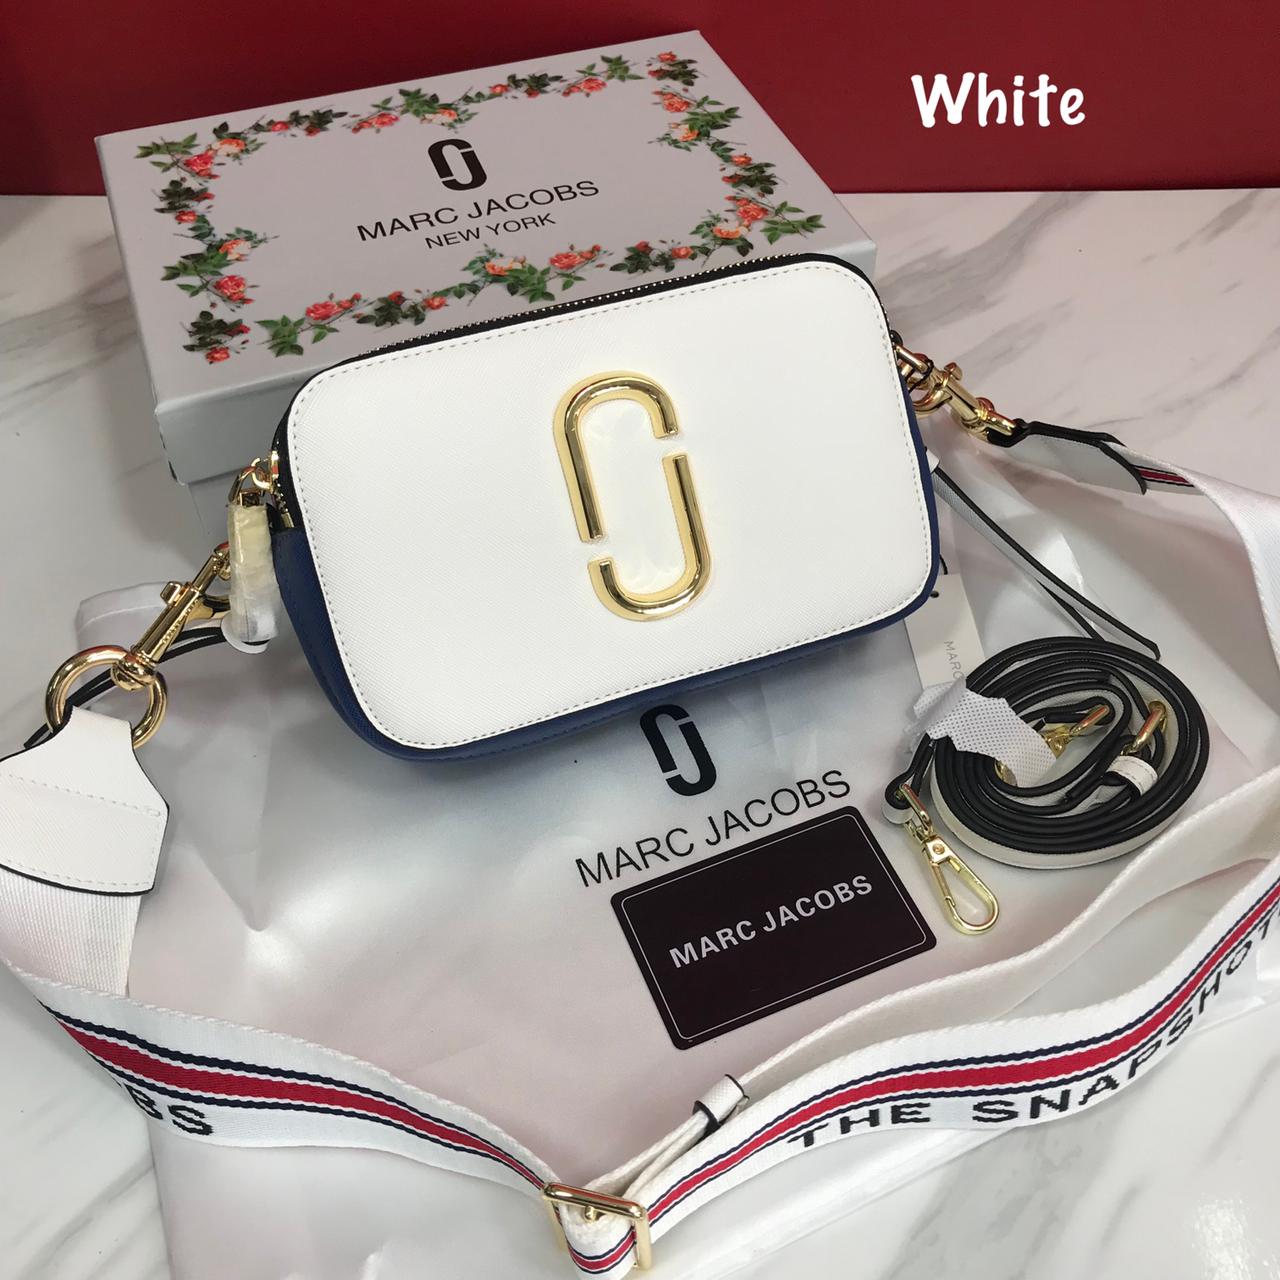 first copy Marc Jacobs Snapshot Bags “White”